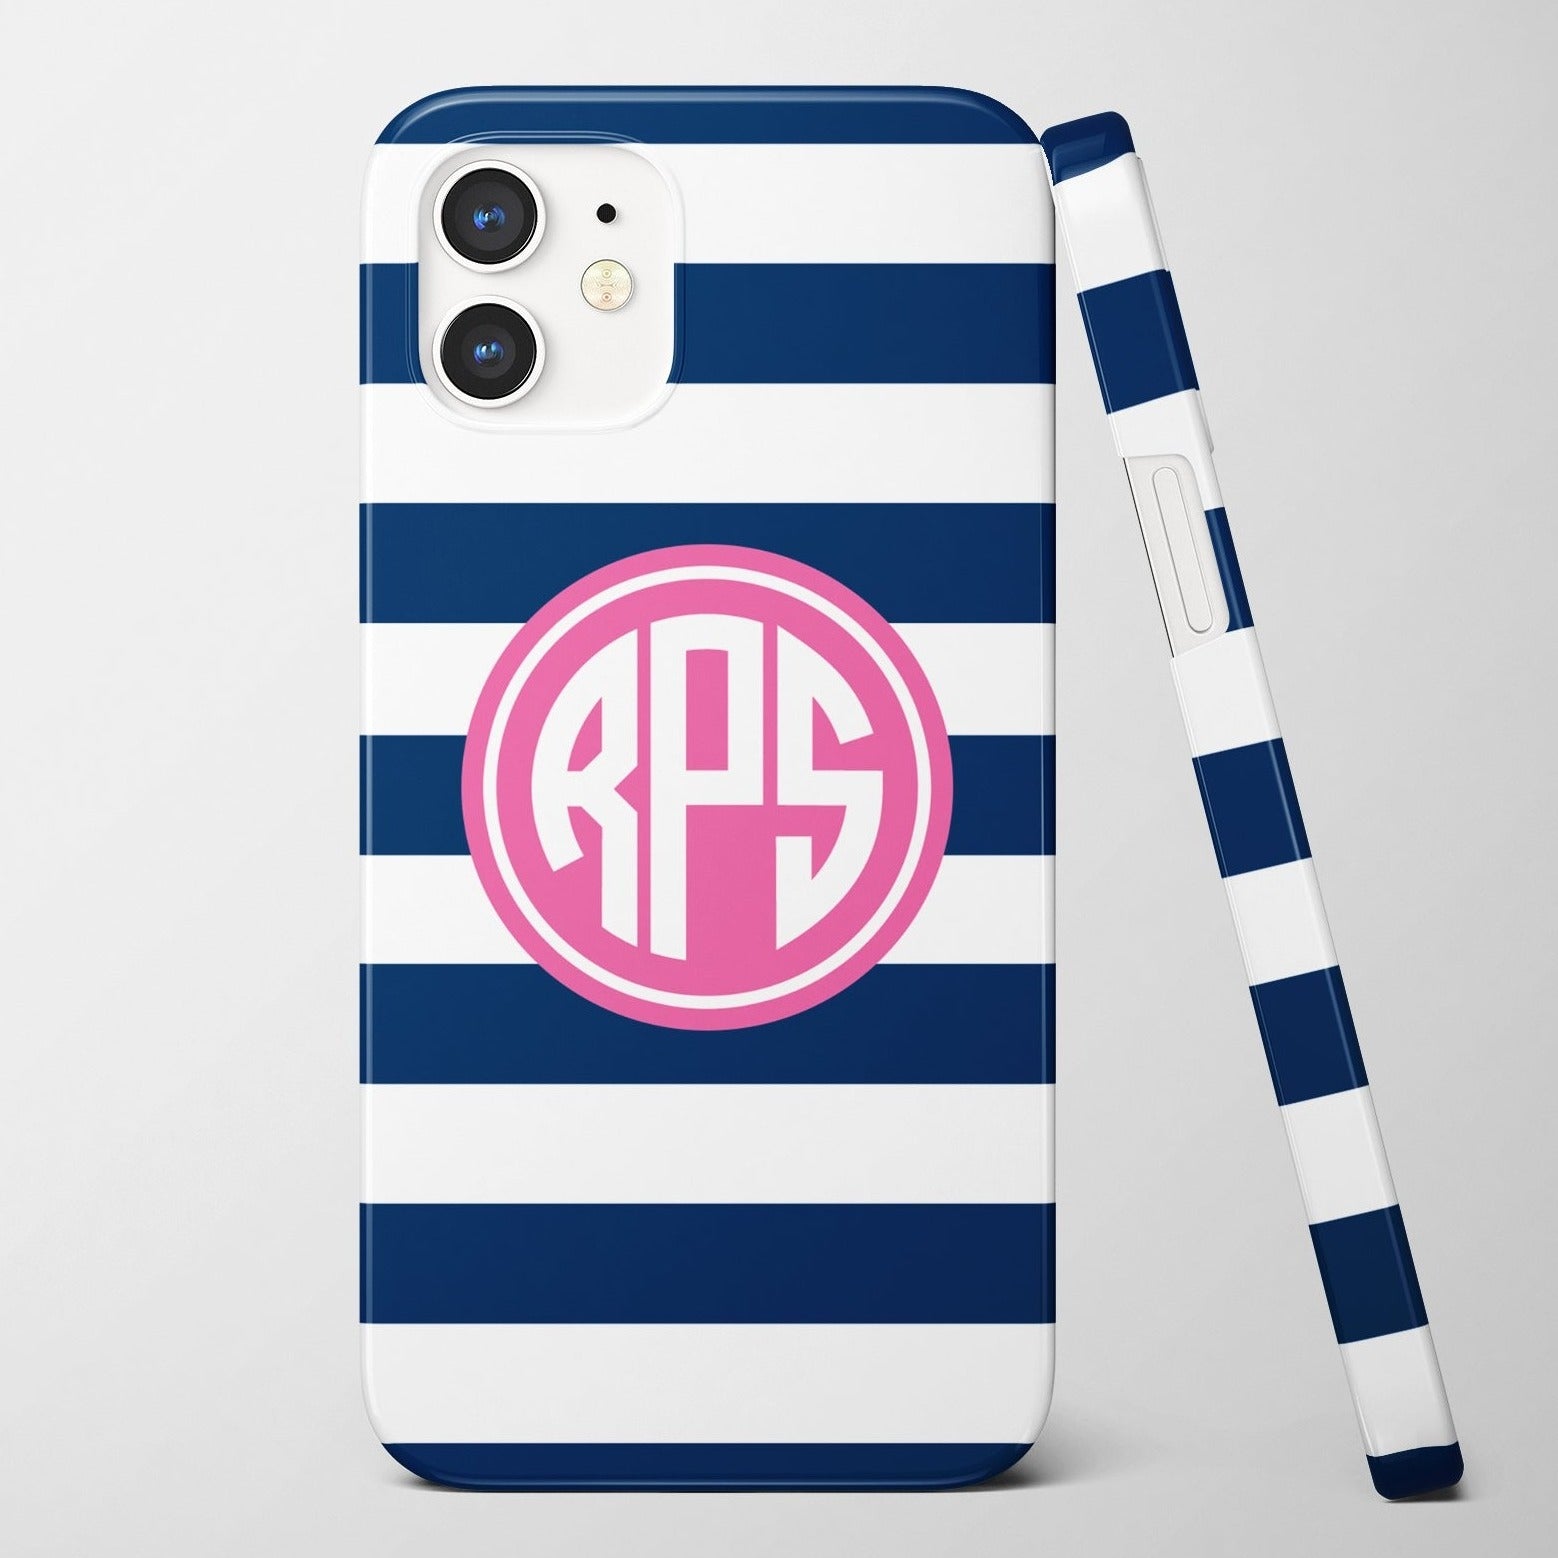 Monogram iPhone case, choose your colors, for the iphone 15 and prior models